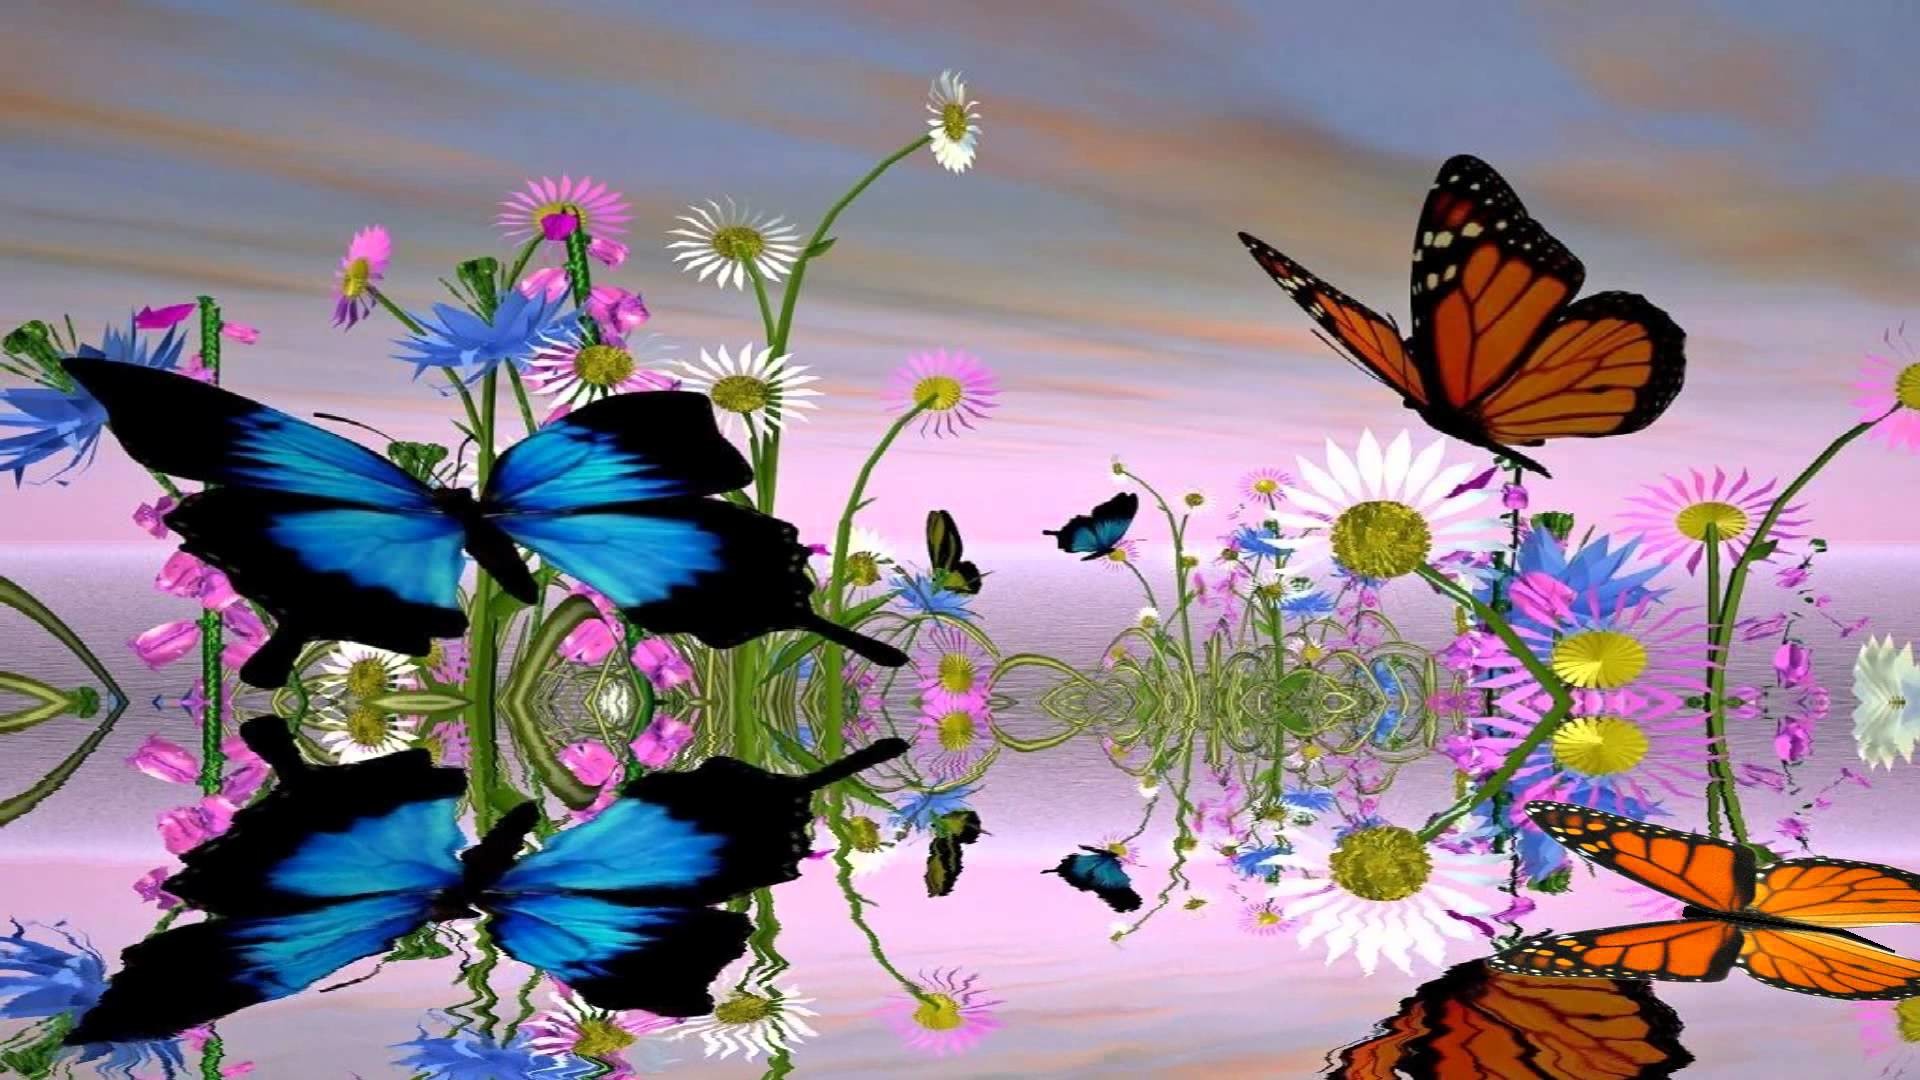 Fantastic Butterfly Animated Wallpaper ktopanimated.com – YouTube